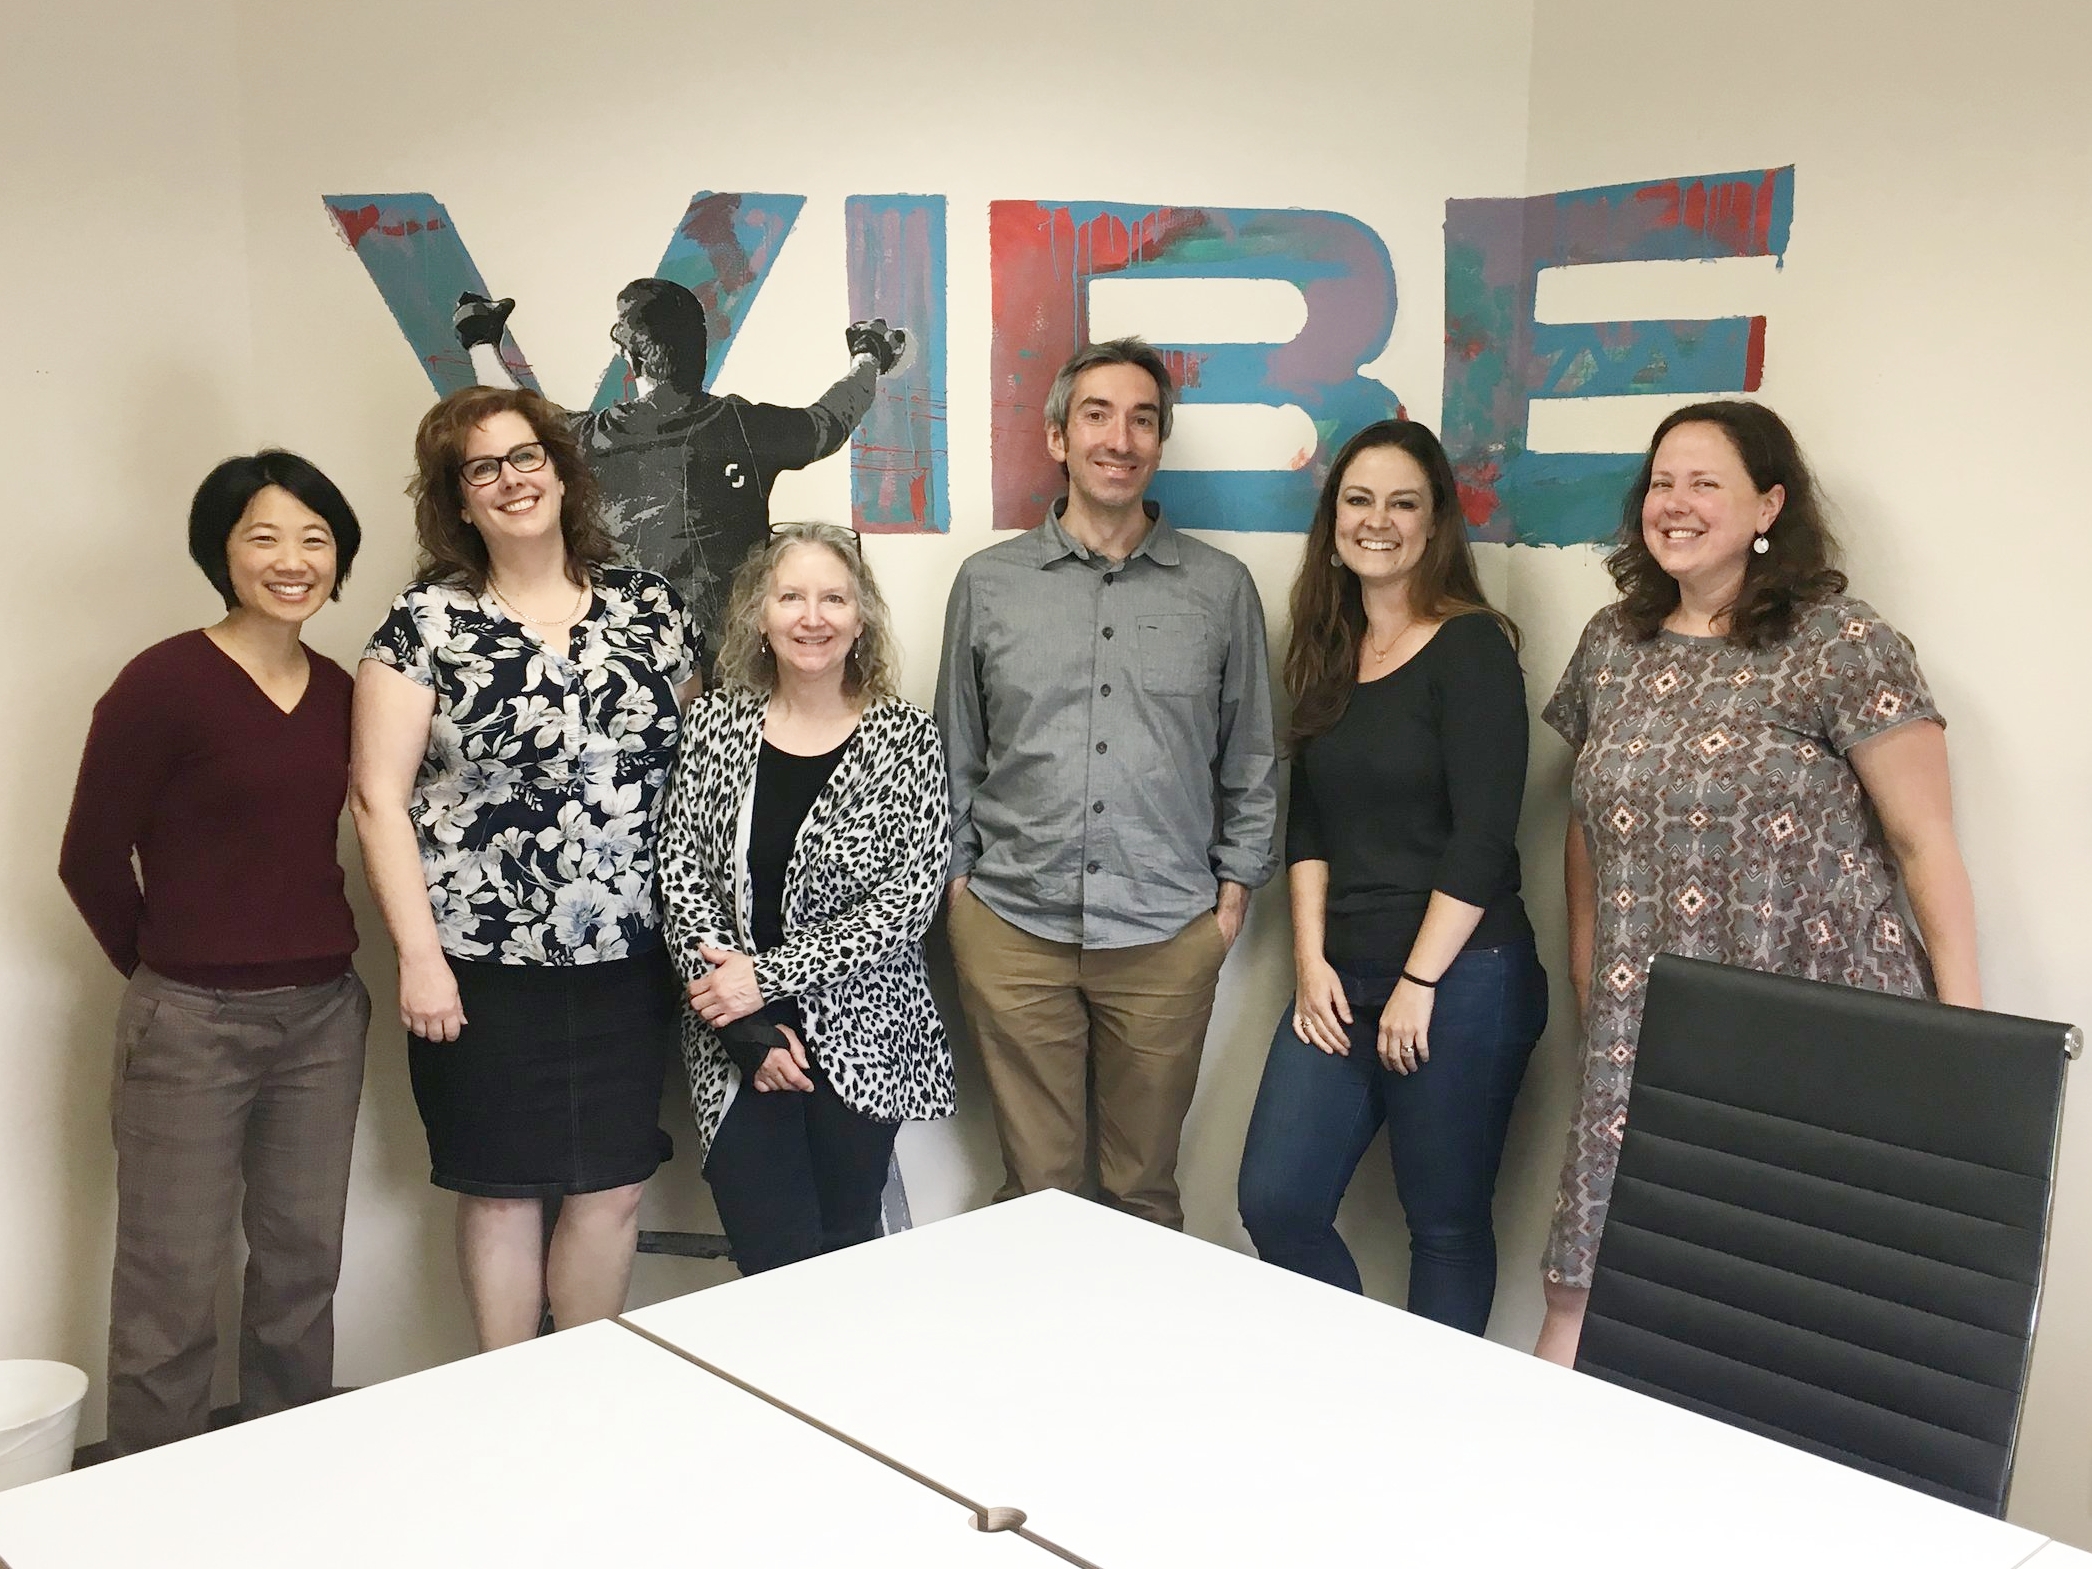 The Vibe partnered-powered series Social Entrepreneurs Unite!&nbsp;is led by Anna Choi. Bring a friend and join us on the 1st Friday of every month from 9:30-10:30am.&nbsp;